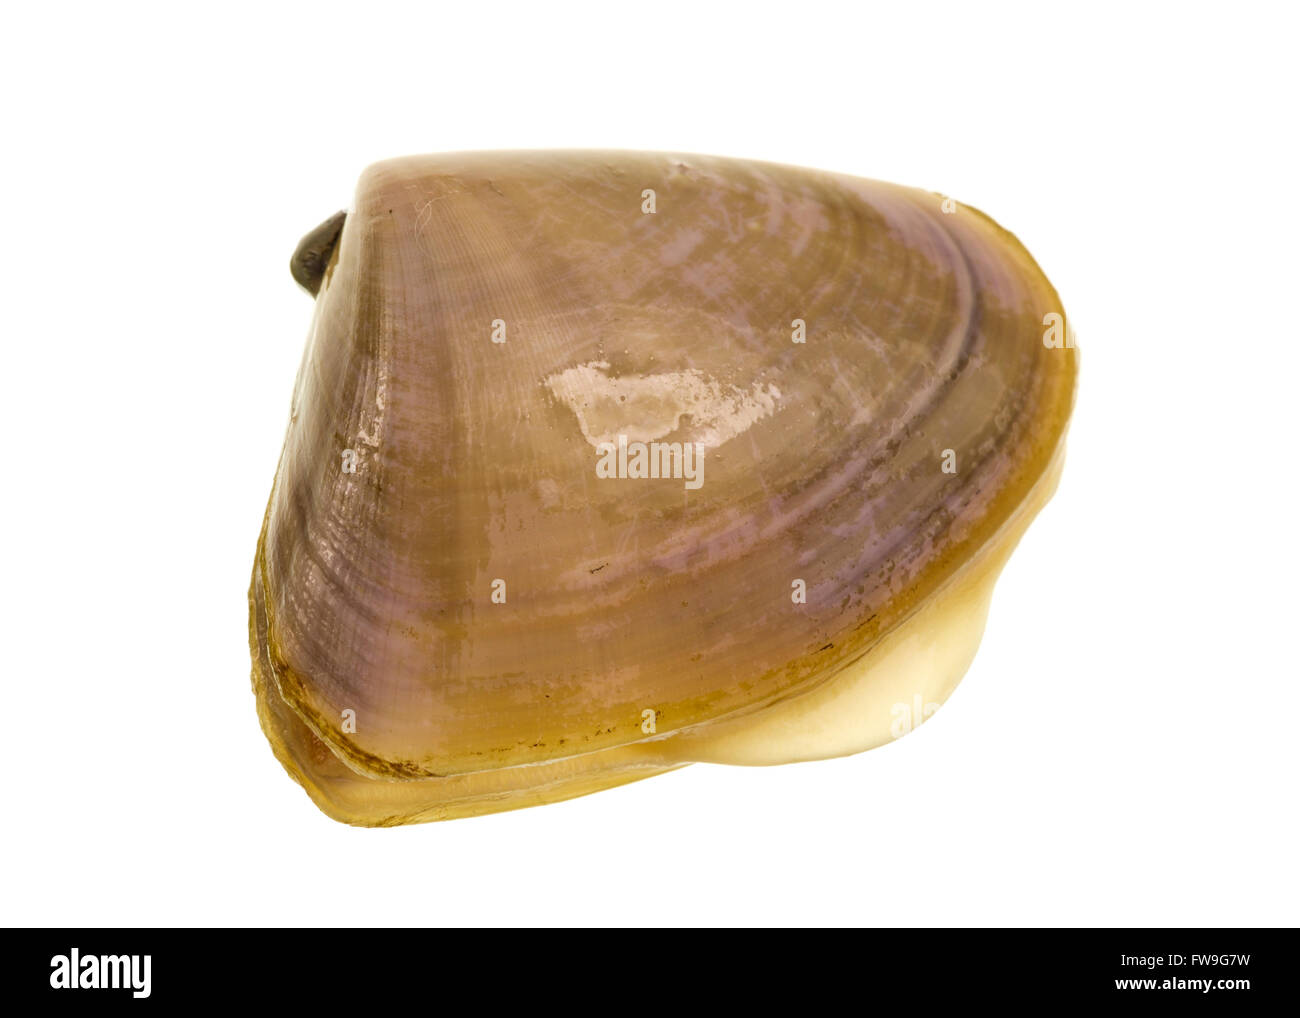 Pipis (Plebidonax deltoides) is a small, edible saltwater clam or marine bivalve mollusc of the family Donacidae, endemic to Aus Stock Photo